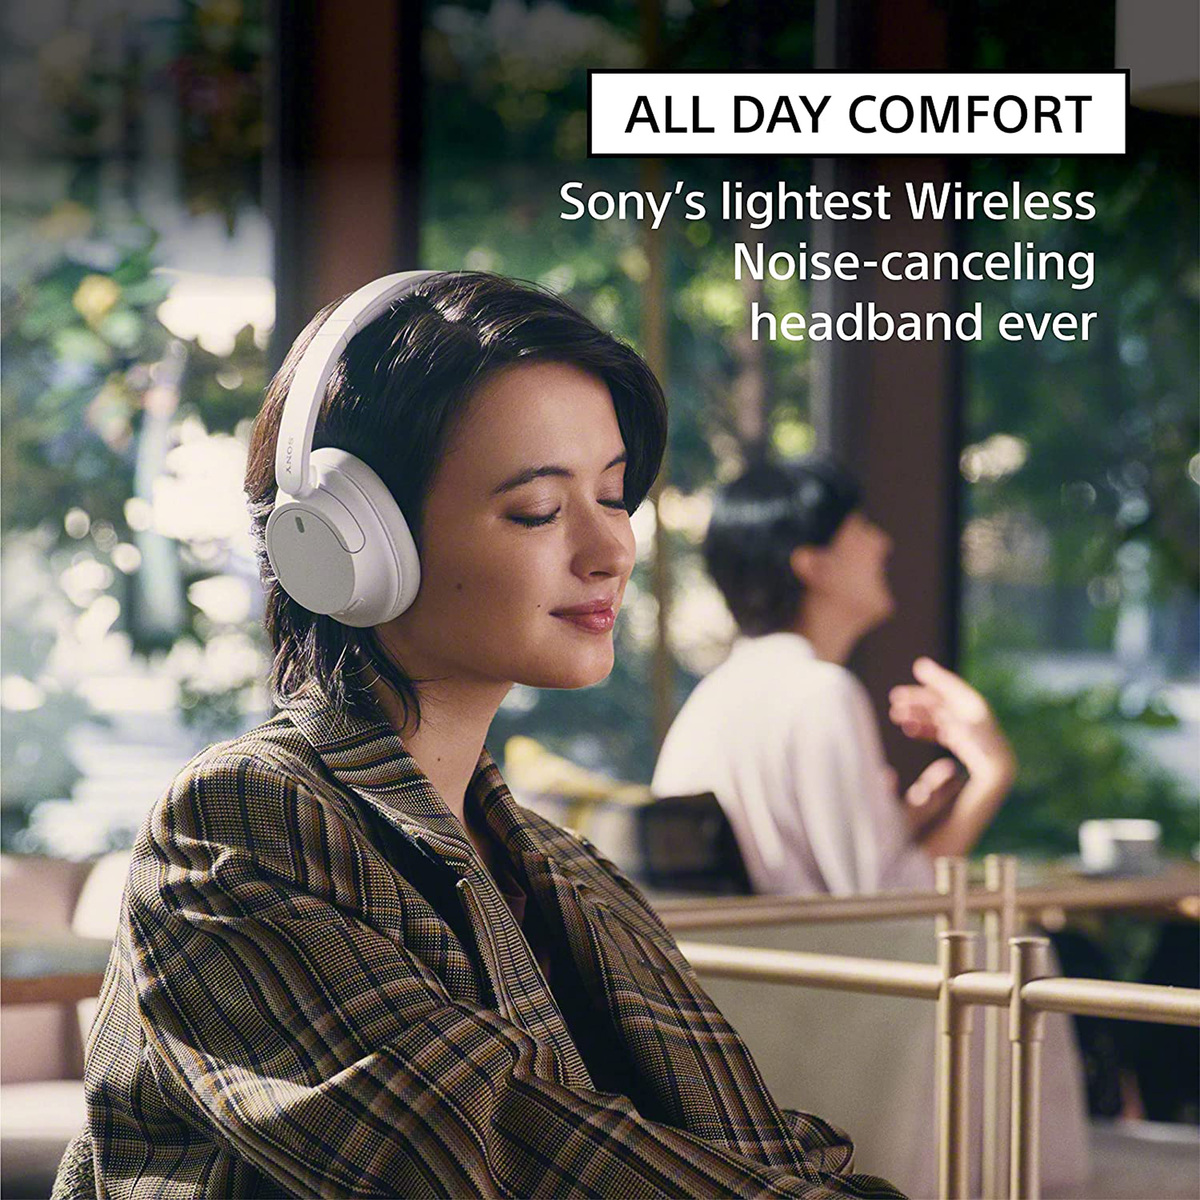 Sony Wireless Noise Cancelling Headphone, White, WH-CH720N